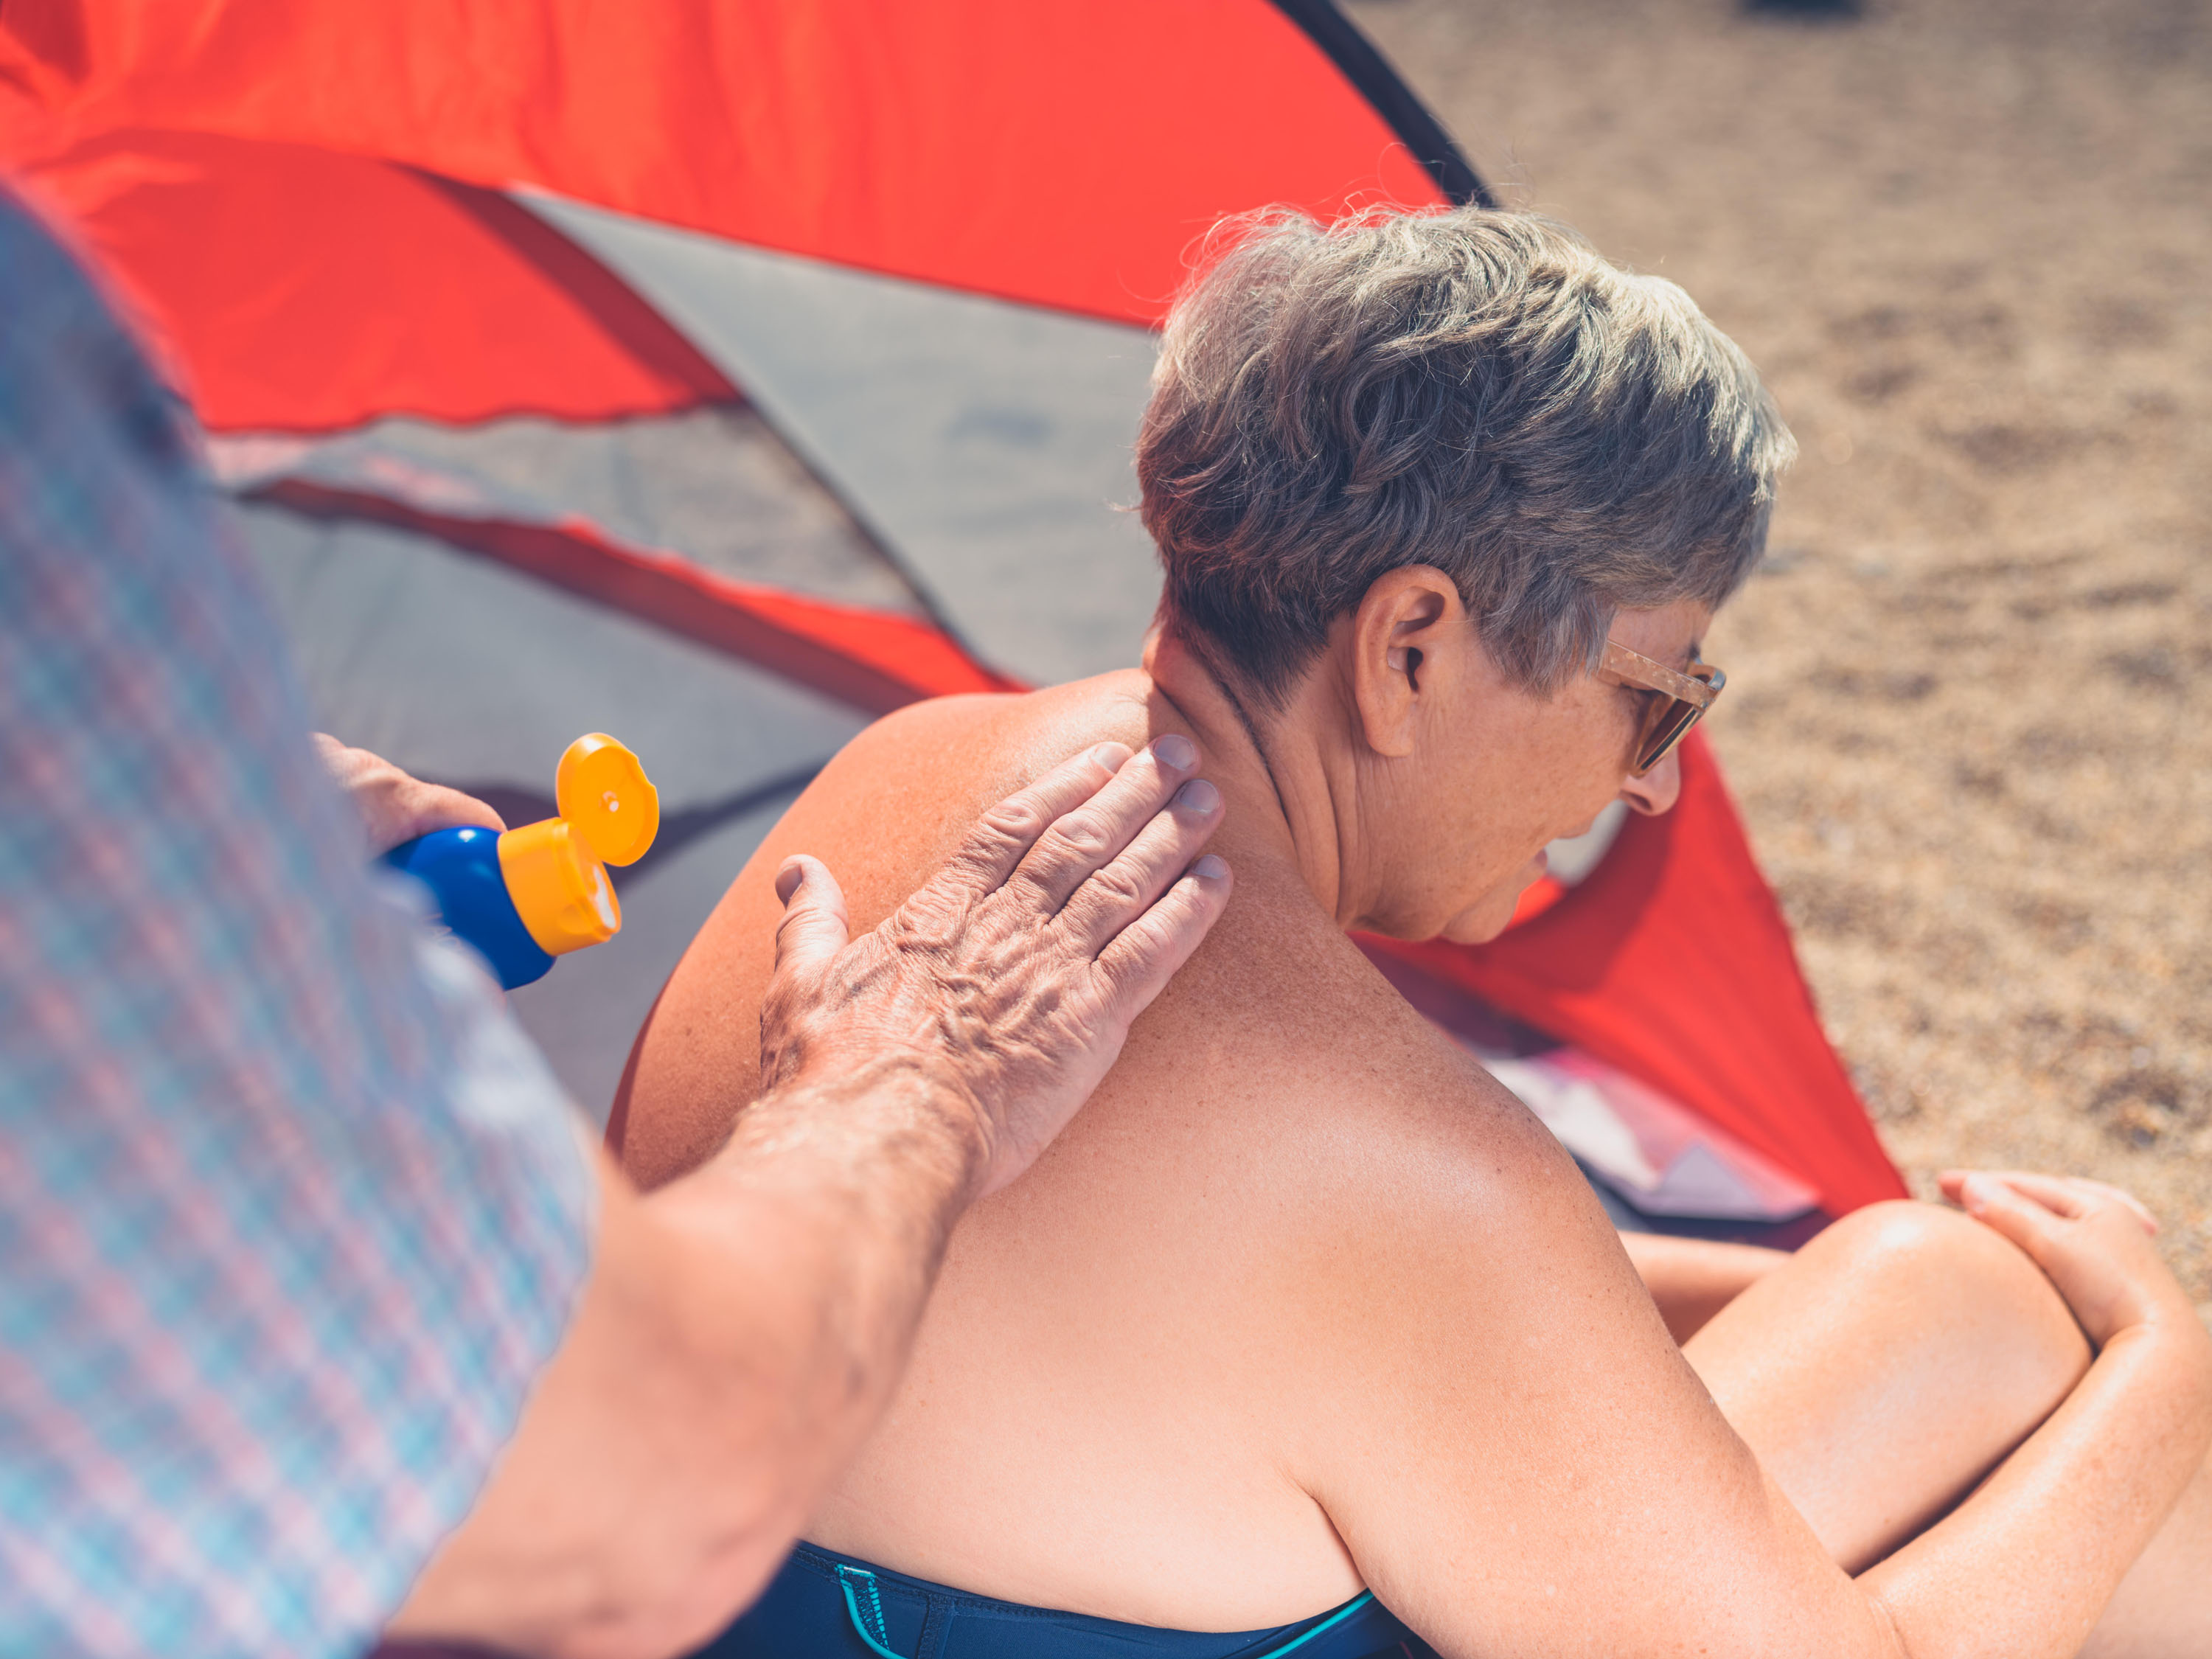 Woman having sun cream applied to her back at the beach.